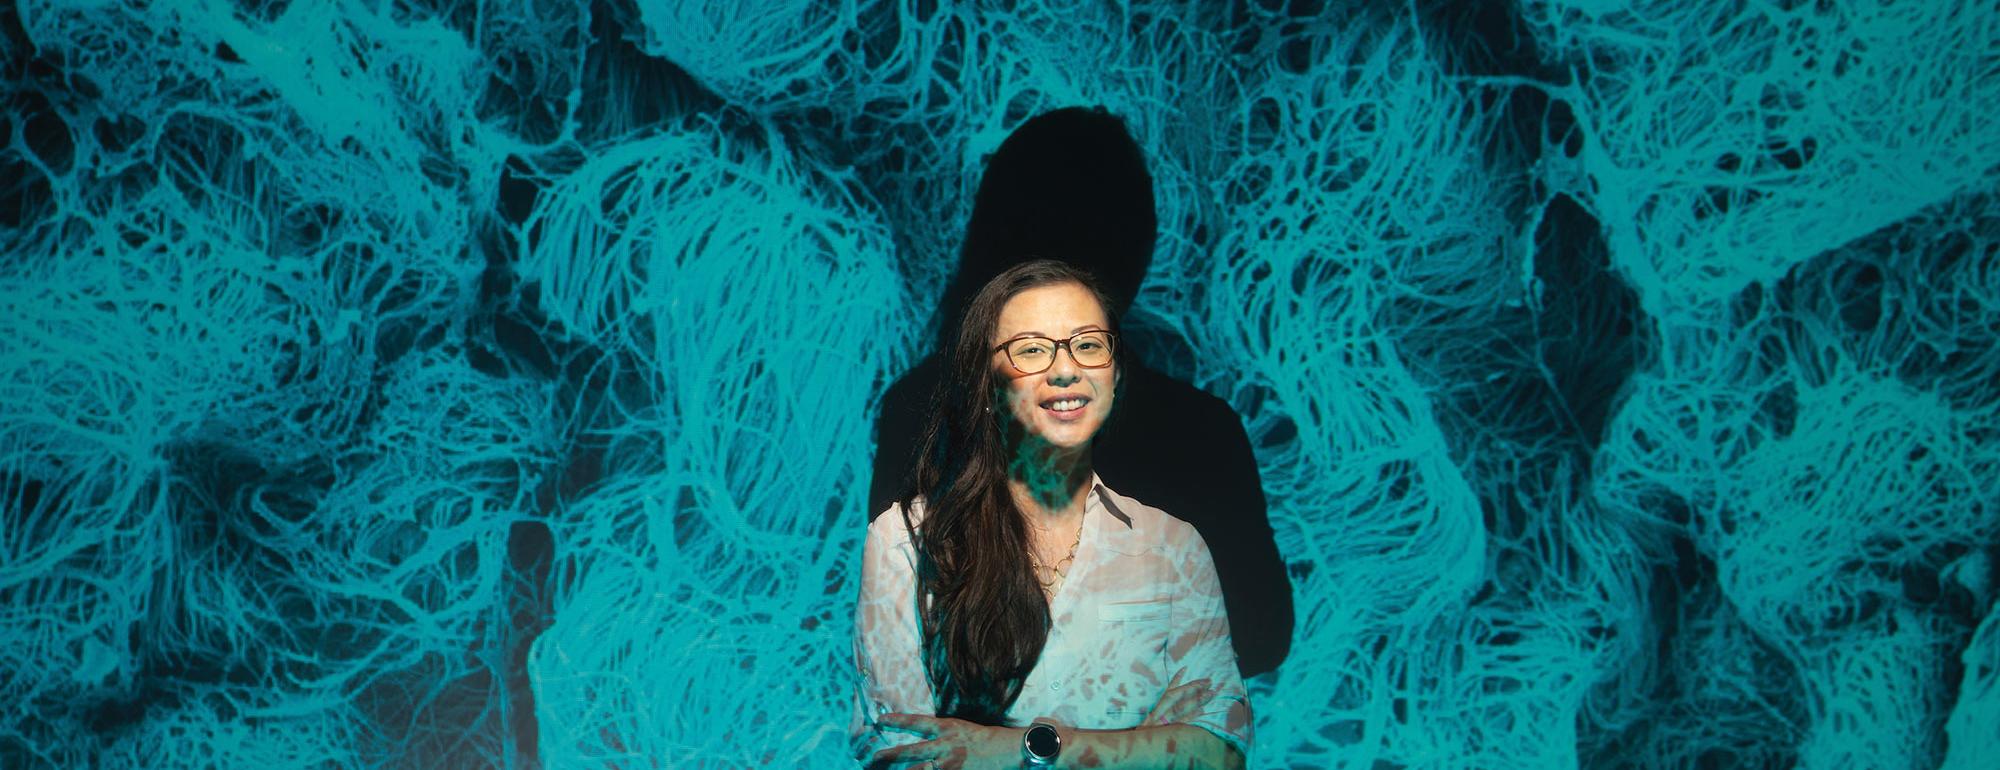 A female student smiles while being projected with an image of microscopic life